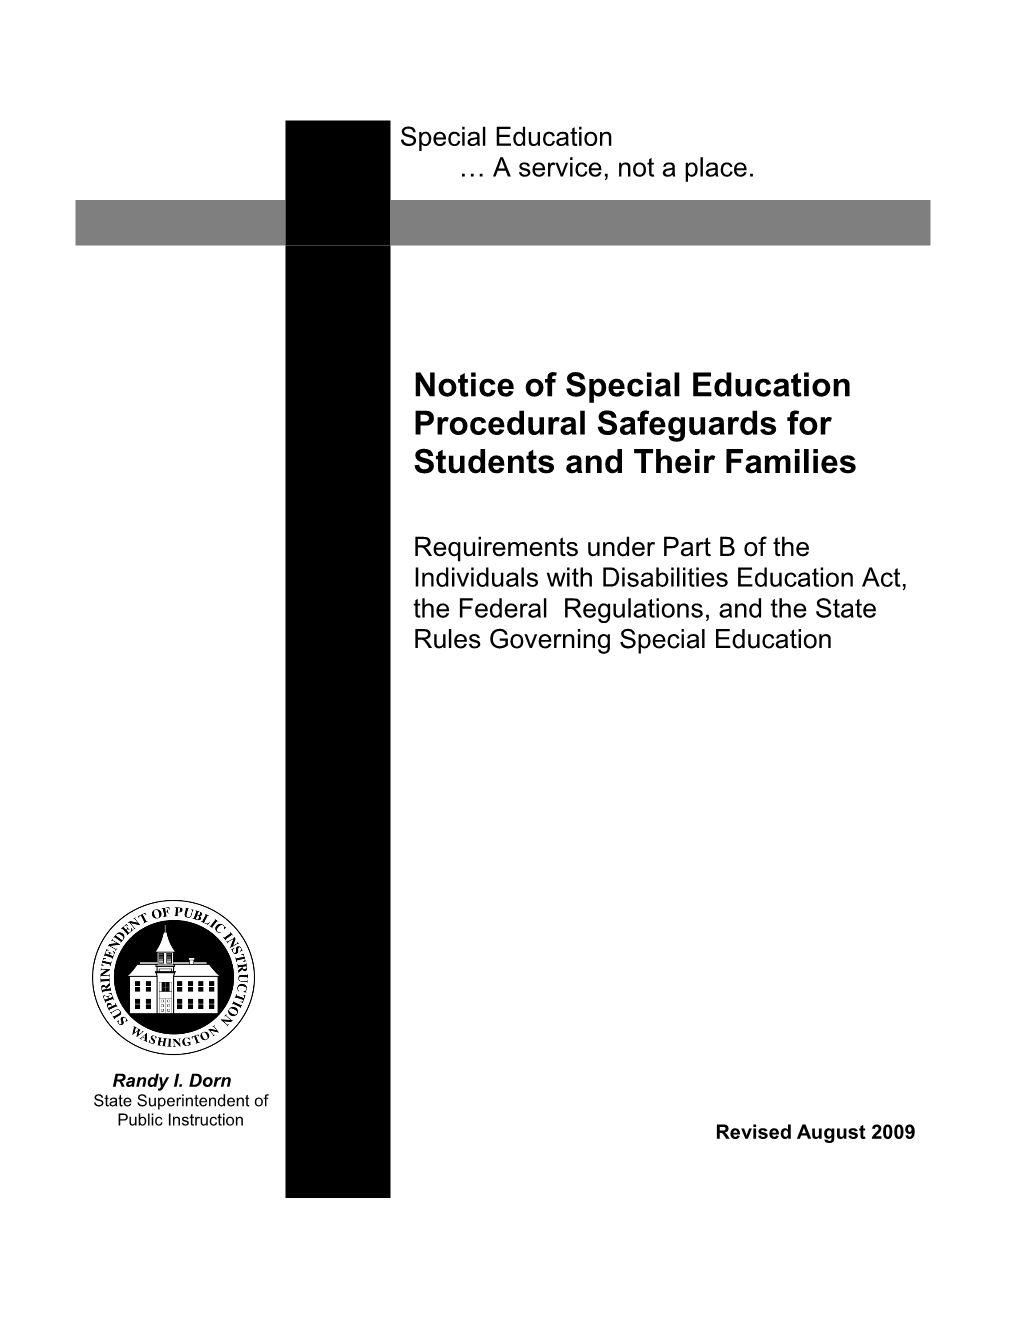 Notice of Special Education